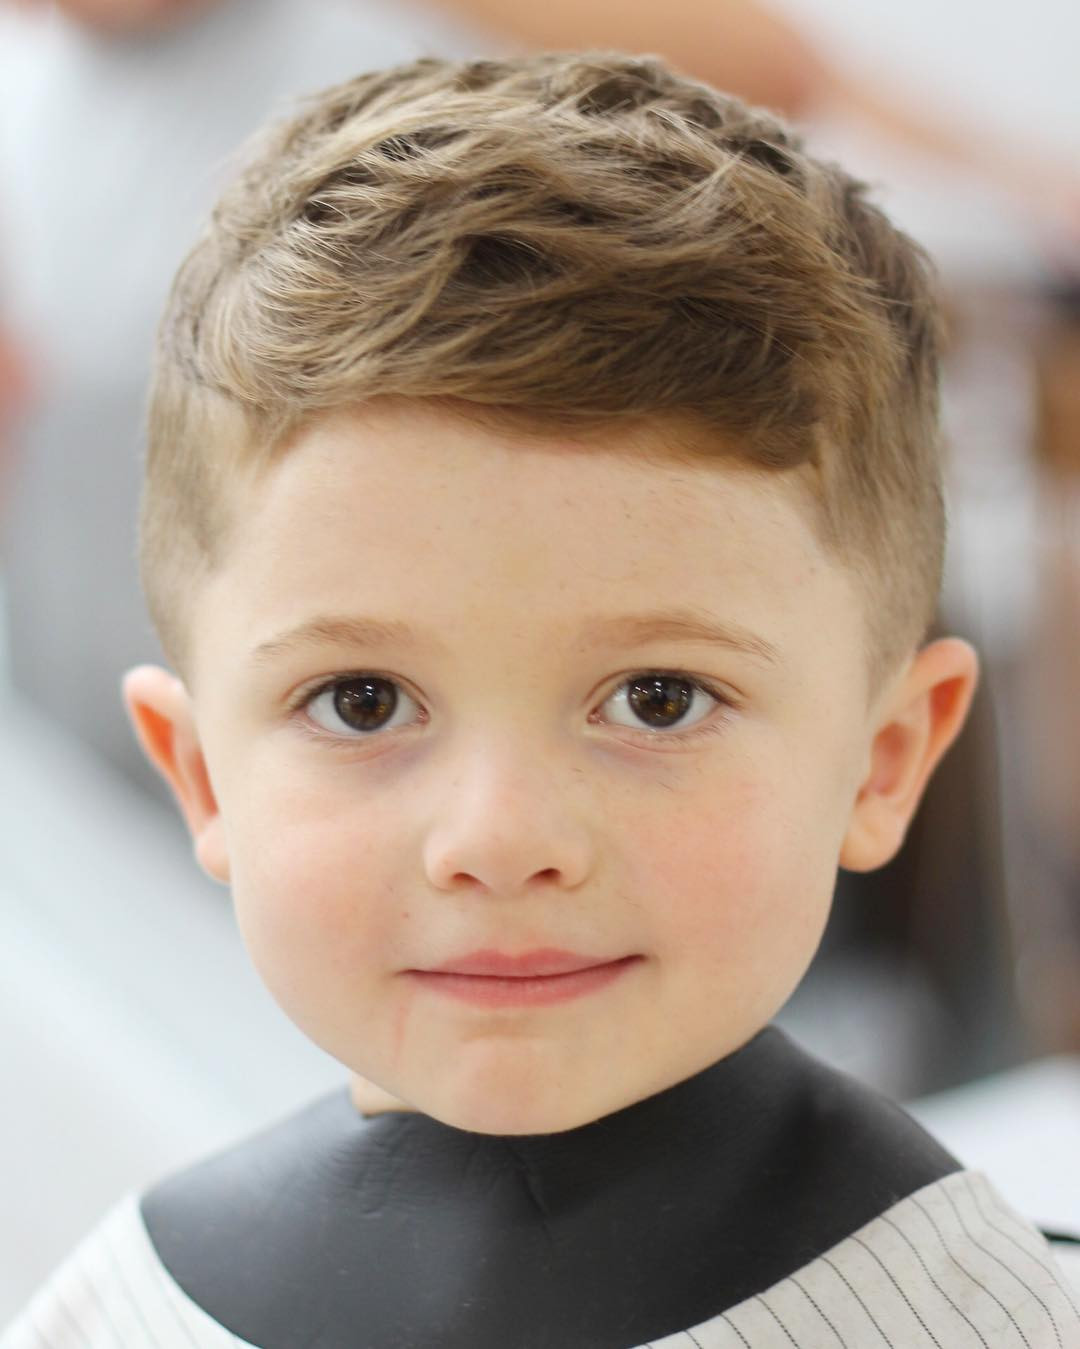 Best Kids Haircuts
 Haircut For Round Face Toddler – Wavy Haircut